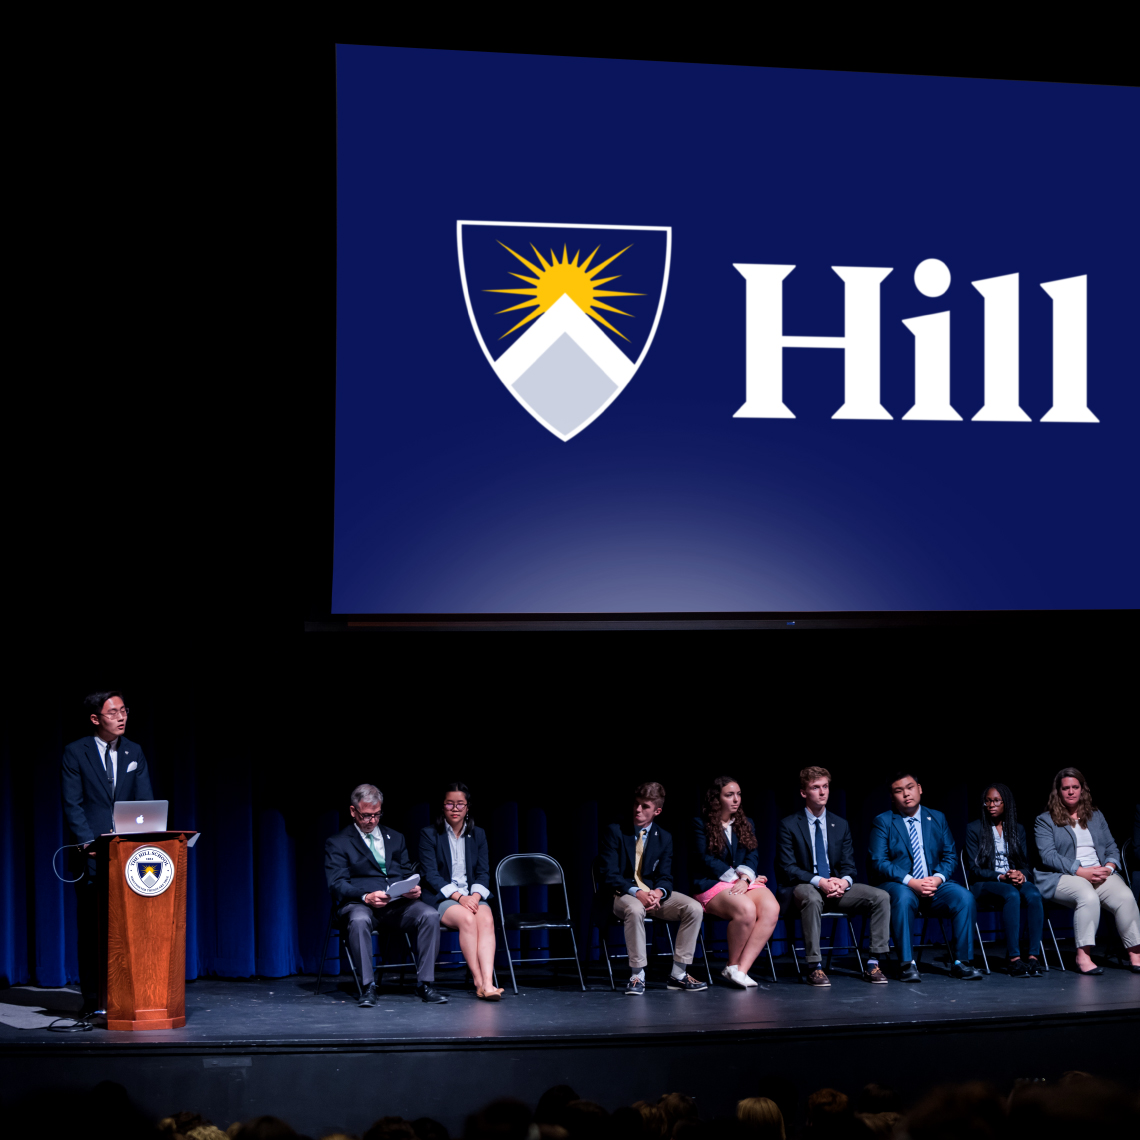 a group of people sitting on a stage with a large horizontal blue banner with the Hill School logo